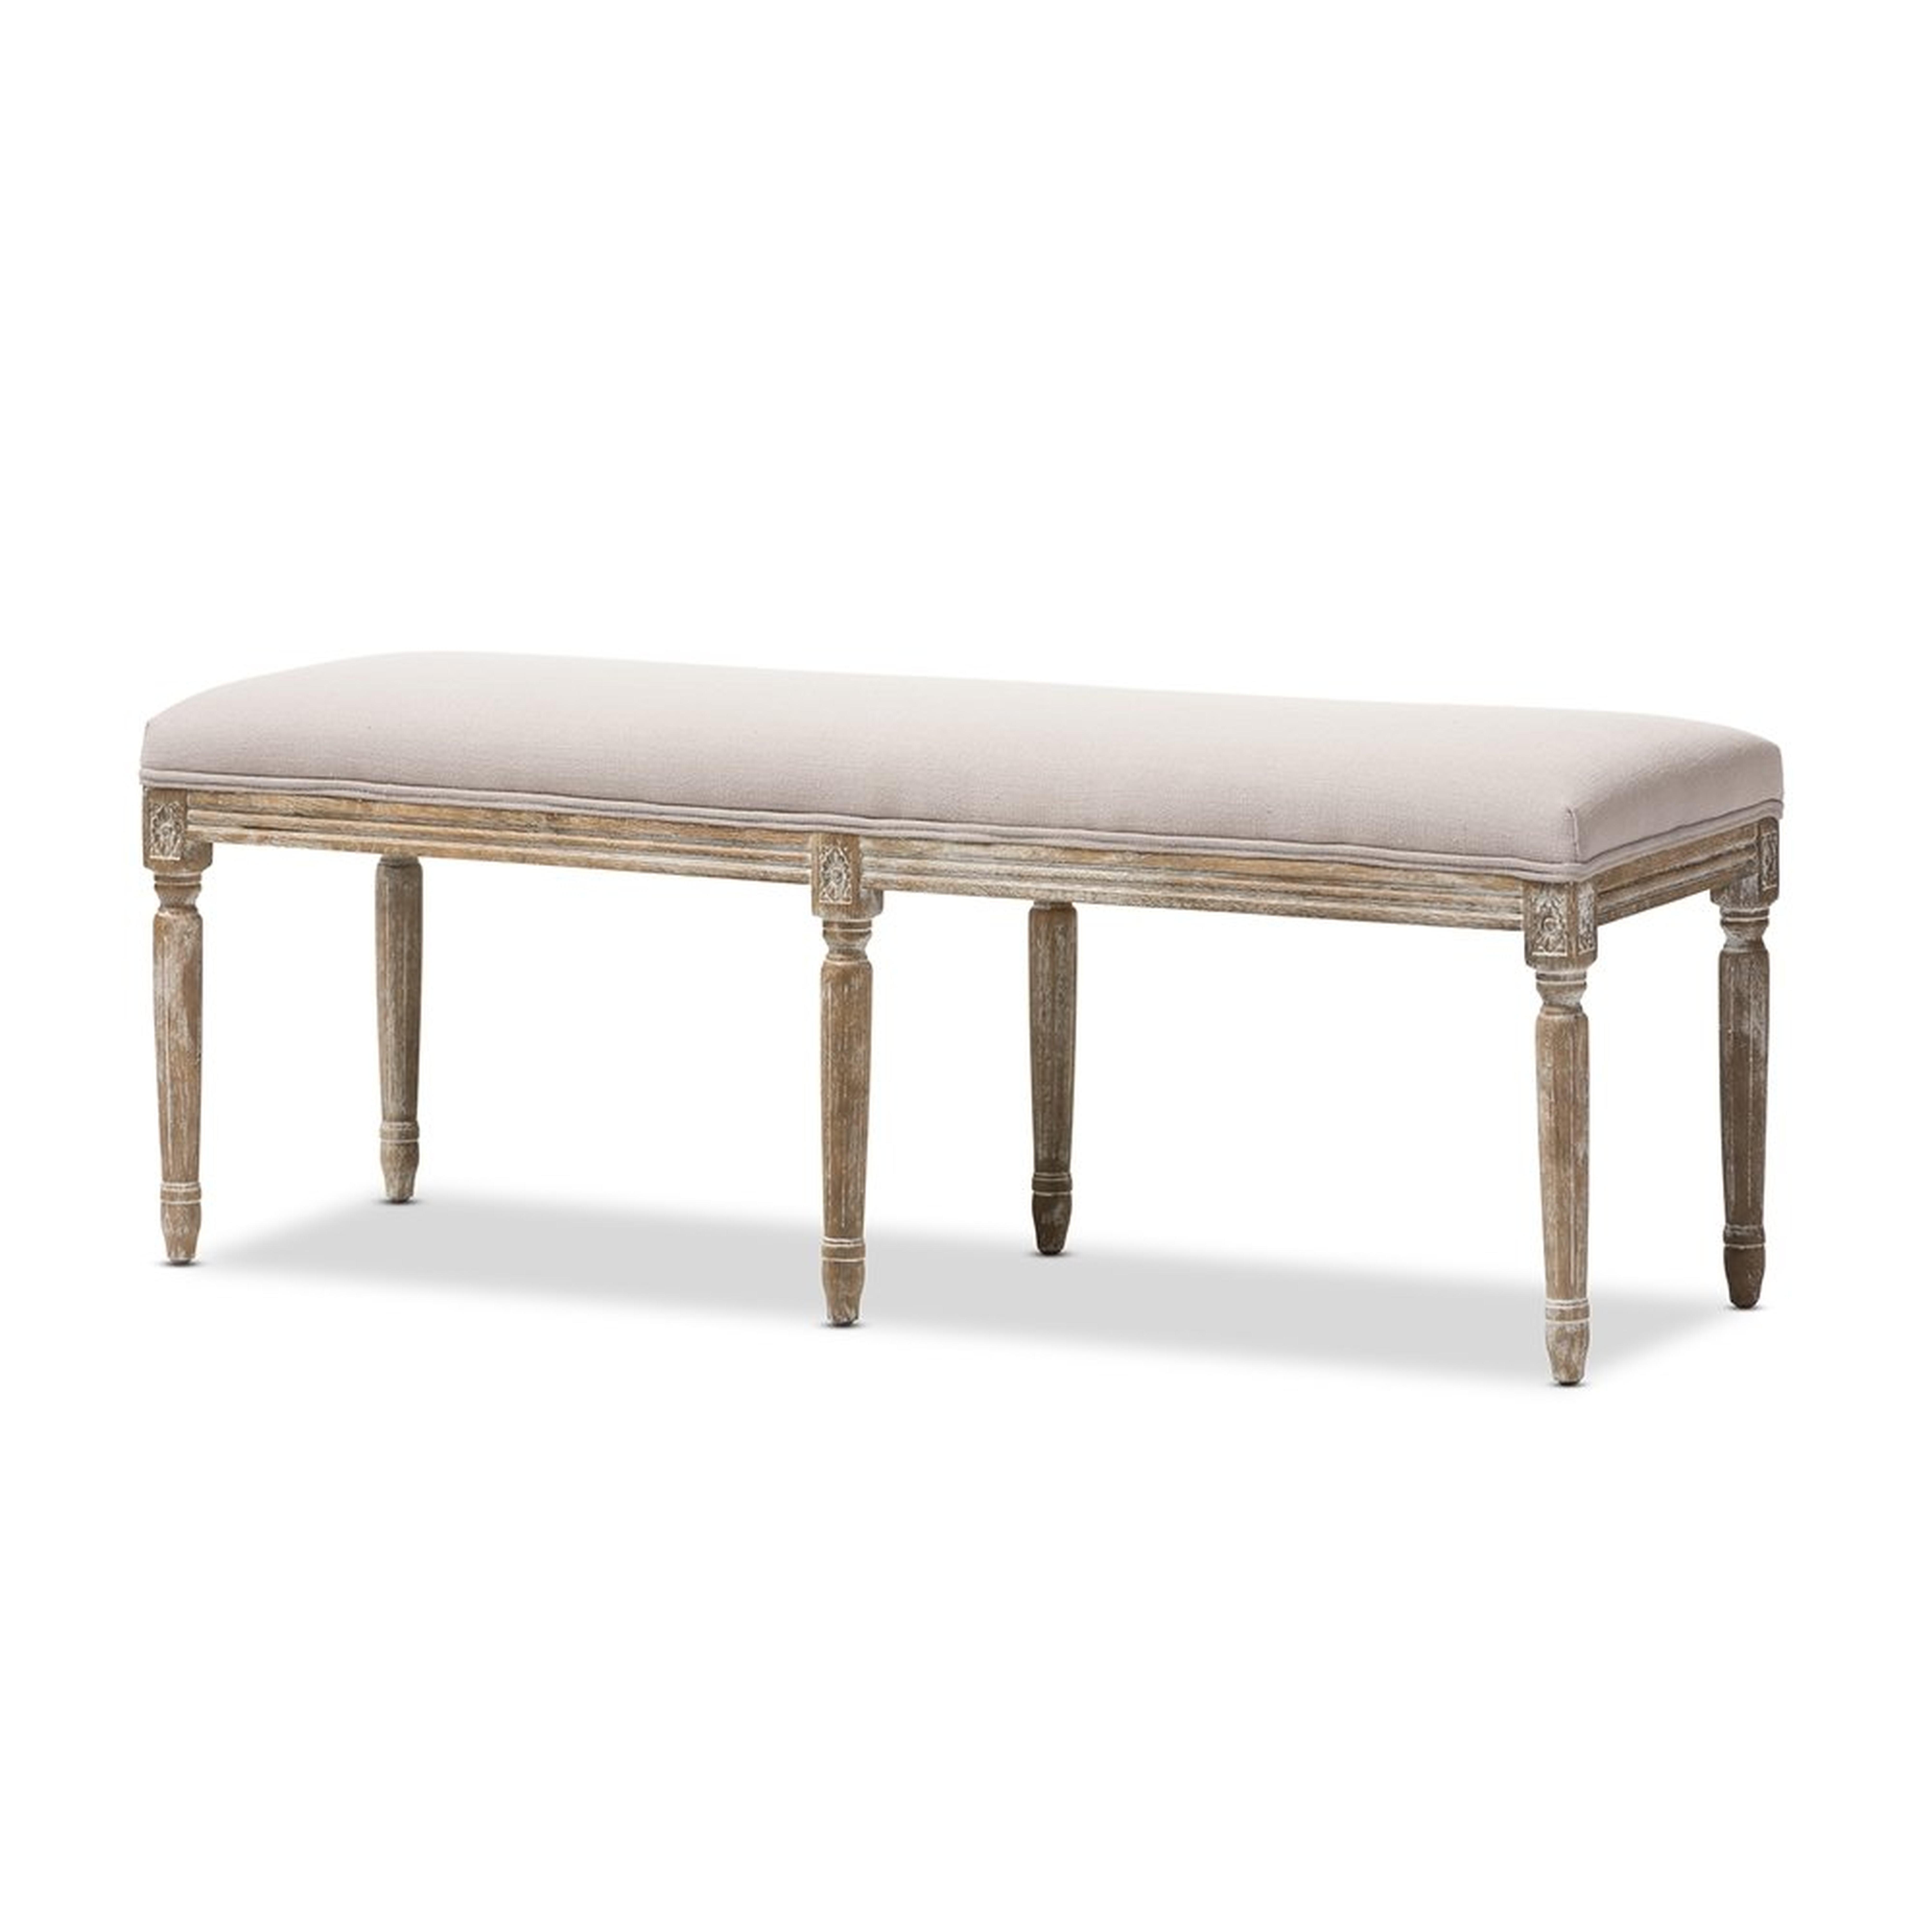 CLAIRETTE TRADITIONAL FRENCH BENCH - Lark Interiors